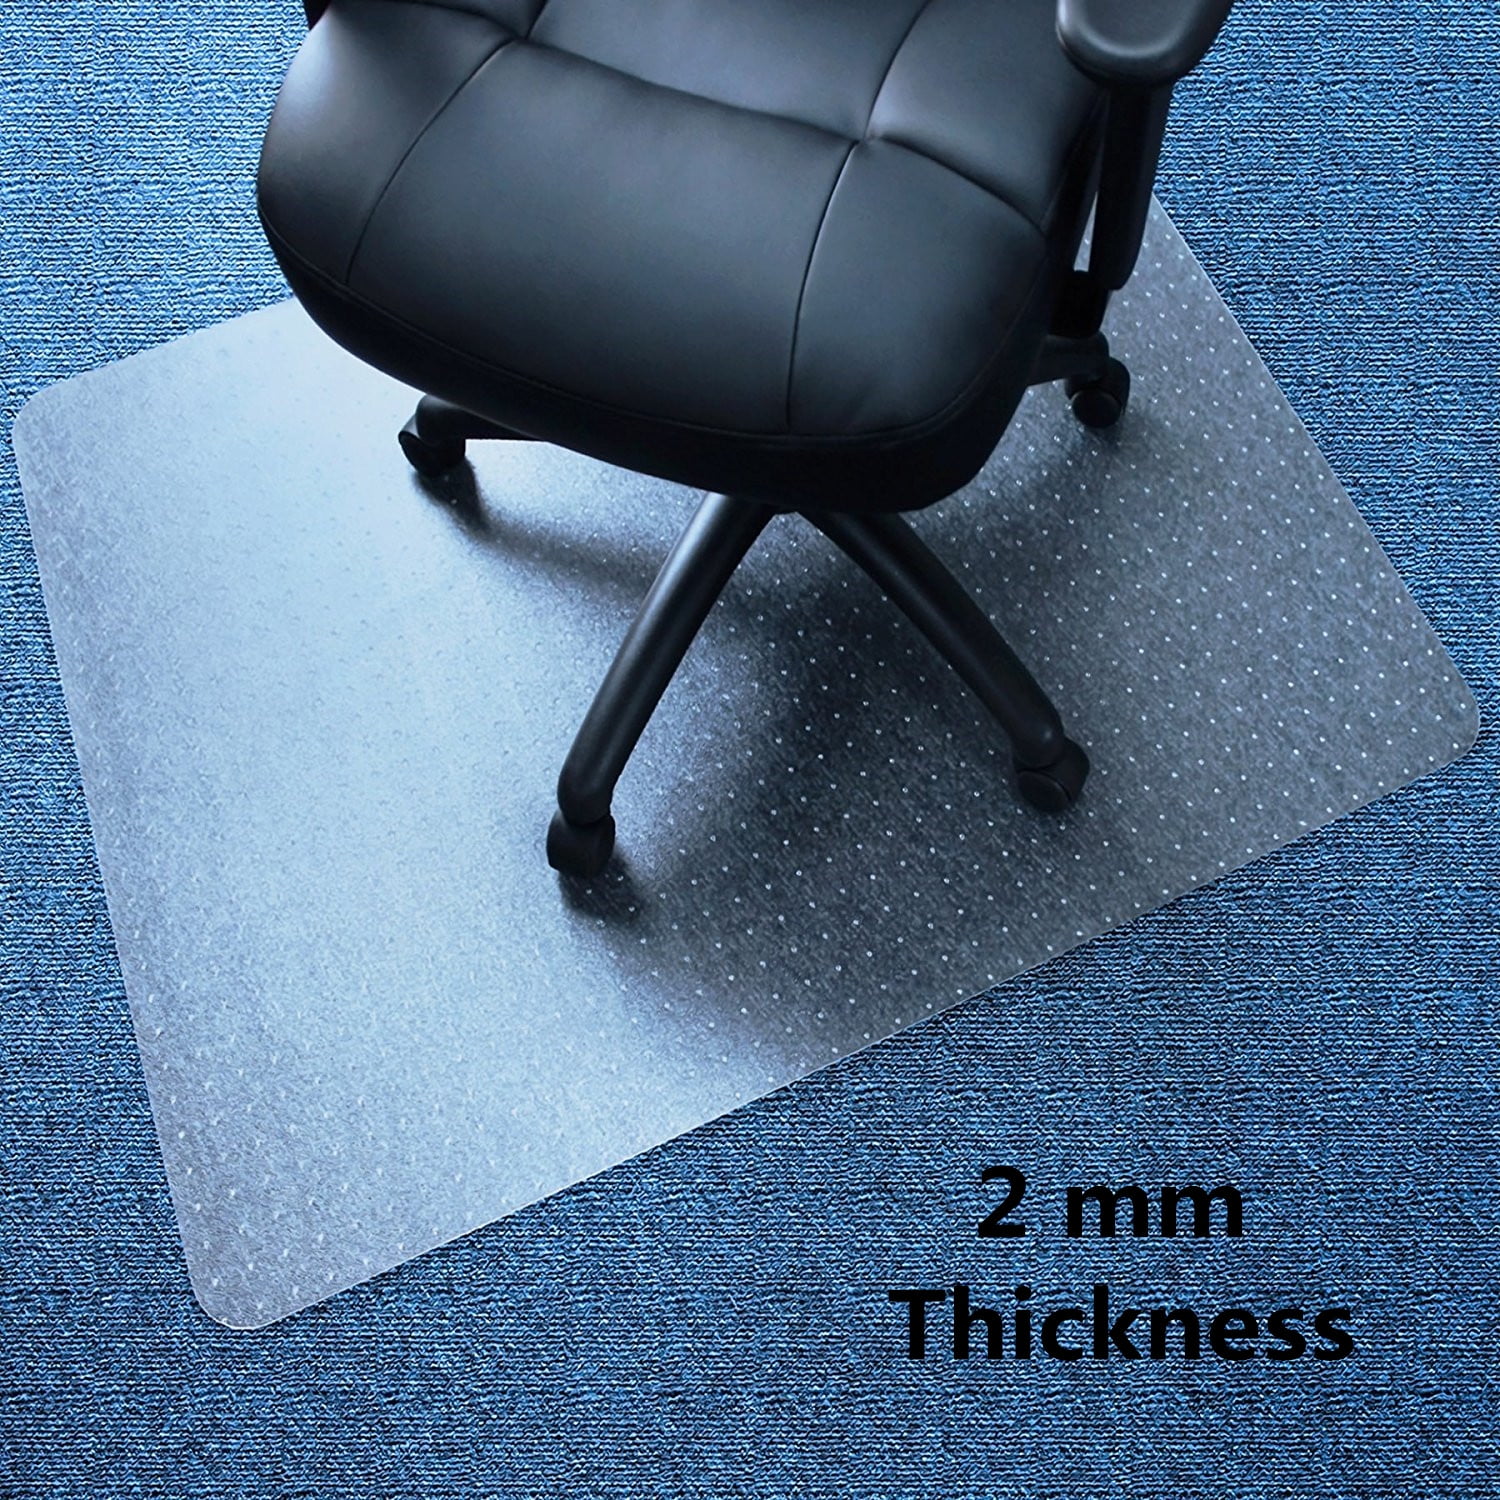 Ktaxon 36" x 48" 2mm Thicken Home Office Chair PVC Floor Mat Studded Back  with Lip for Pile Carpet - Walmart.com